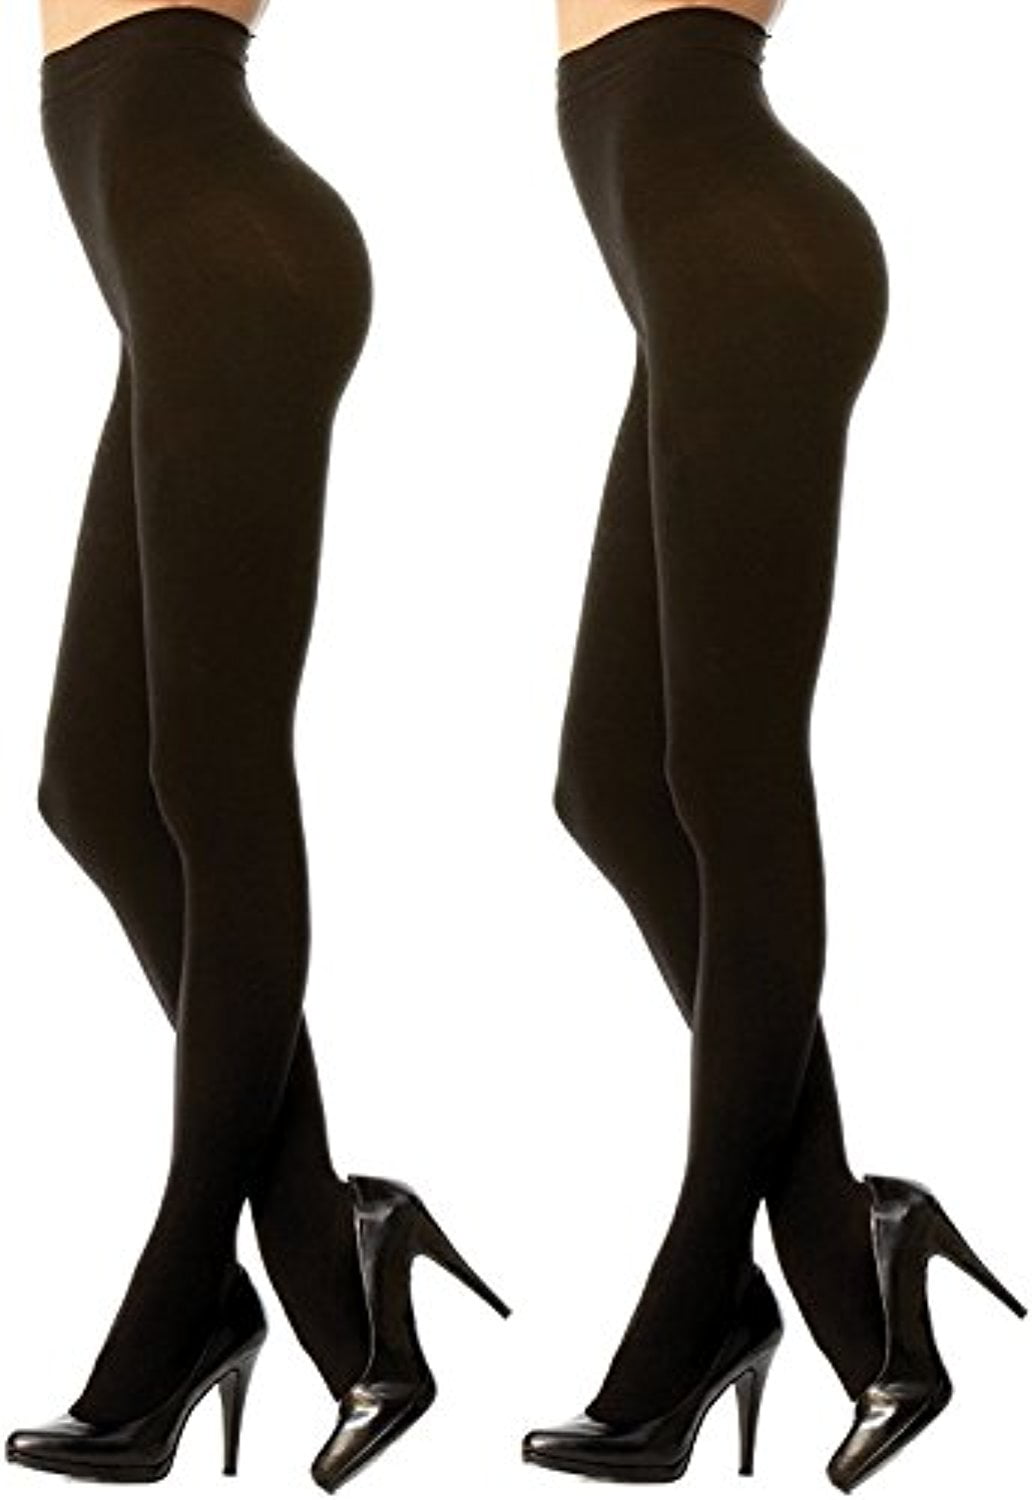 2 Pairs of Mod & Tone Black Microfiber Opaque Footed Tights, 60 Denier ...